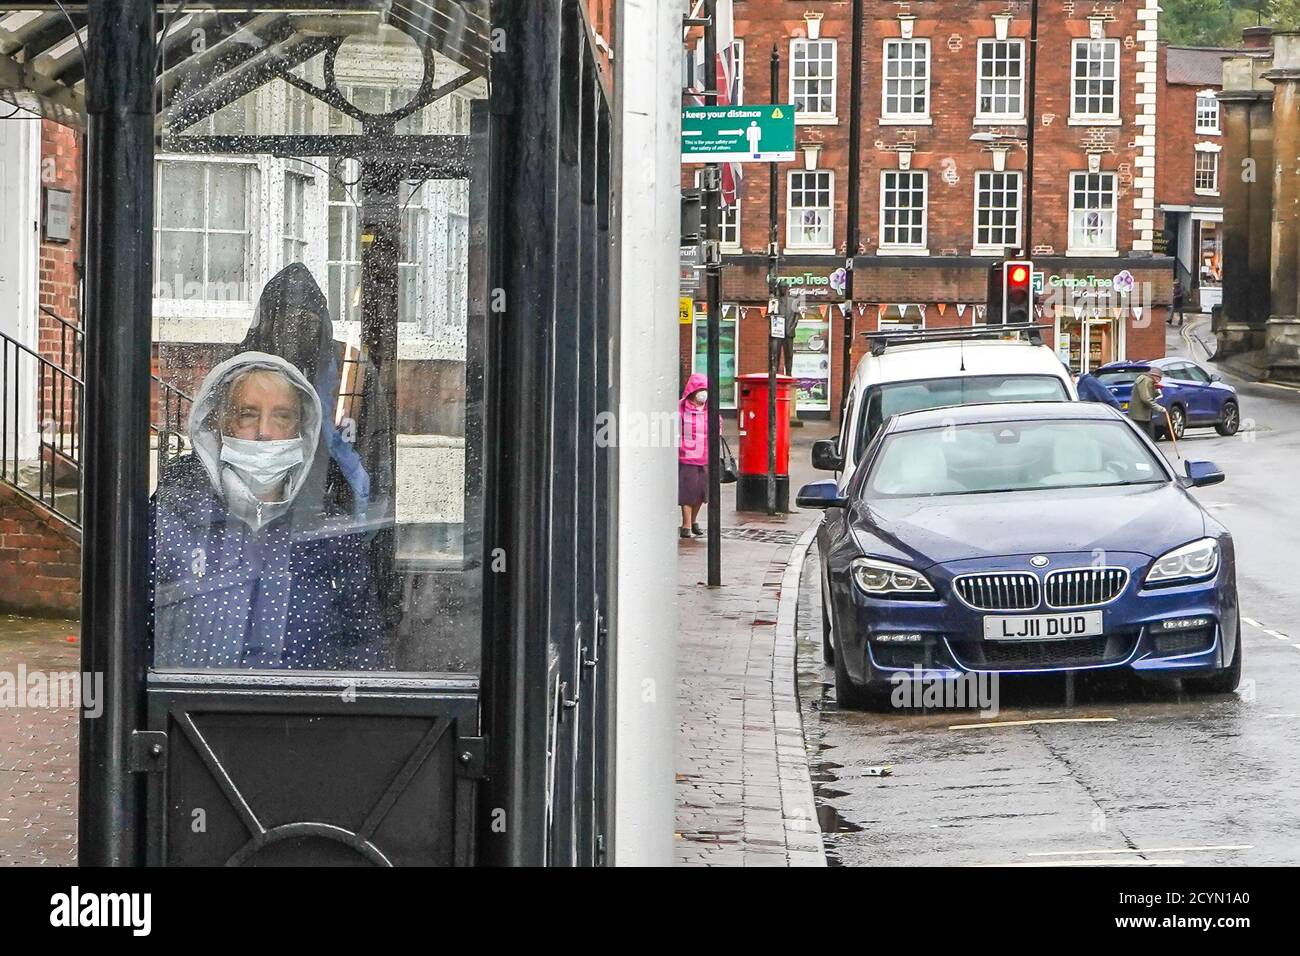 Bewdley, UK. 2nd October, 2020. UK weather: persistent rain and breezy winds make for a miserable shopping experience on an already quiet high street. A lady looks truly unhappy while wearing a mask using the cover of the bus shelter to protect her from the wind and rain as she waits for her transport home. Credit: Lee Hudson/Alamy Live News Stock Photo